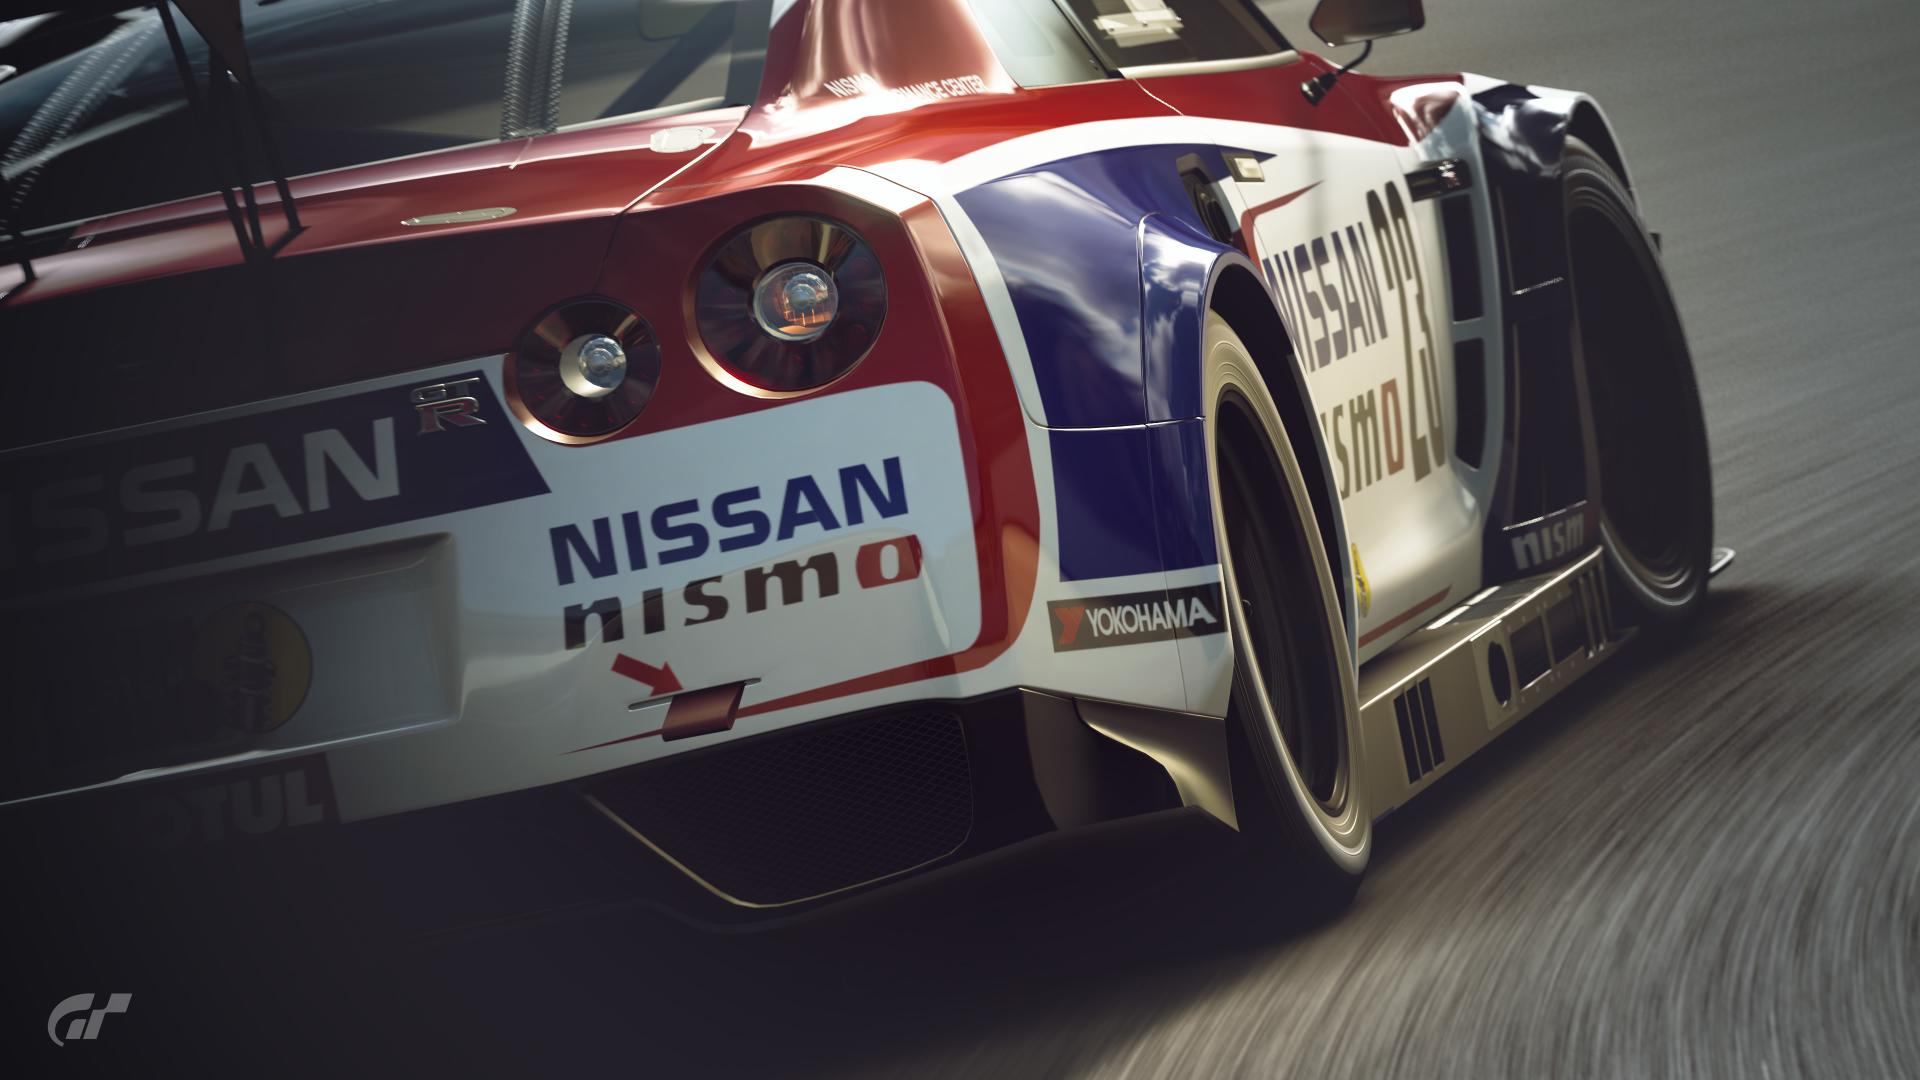 General 1920x1080 Gran Turismo Sport video games watermarked racing driving car livery PlayStation vehicle race cars Nissan Nissan GT-R NISMO motion blur rear view gonpera GT GT3 racing Japanese cars video game art